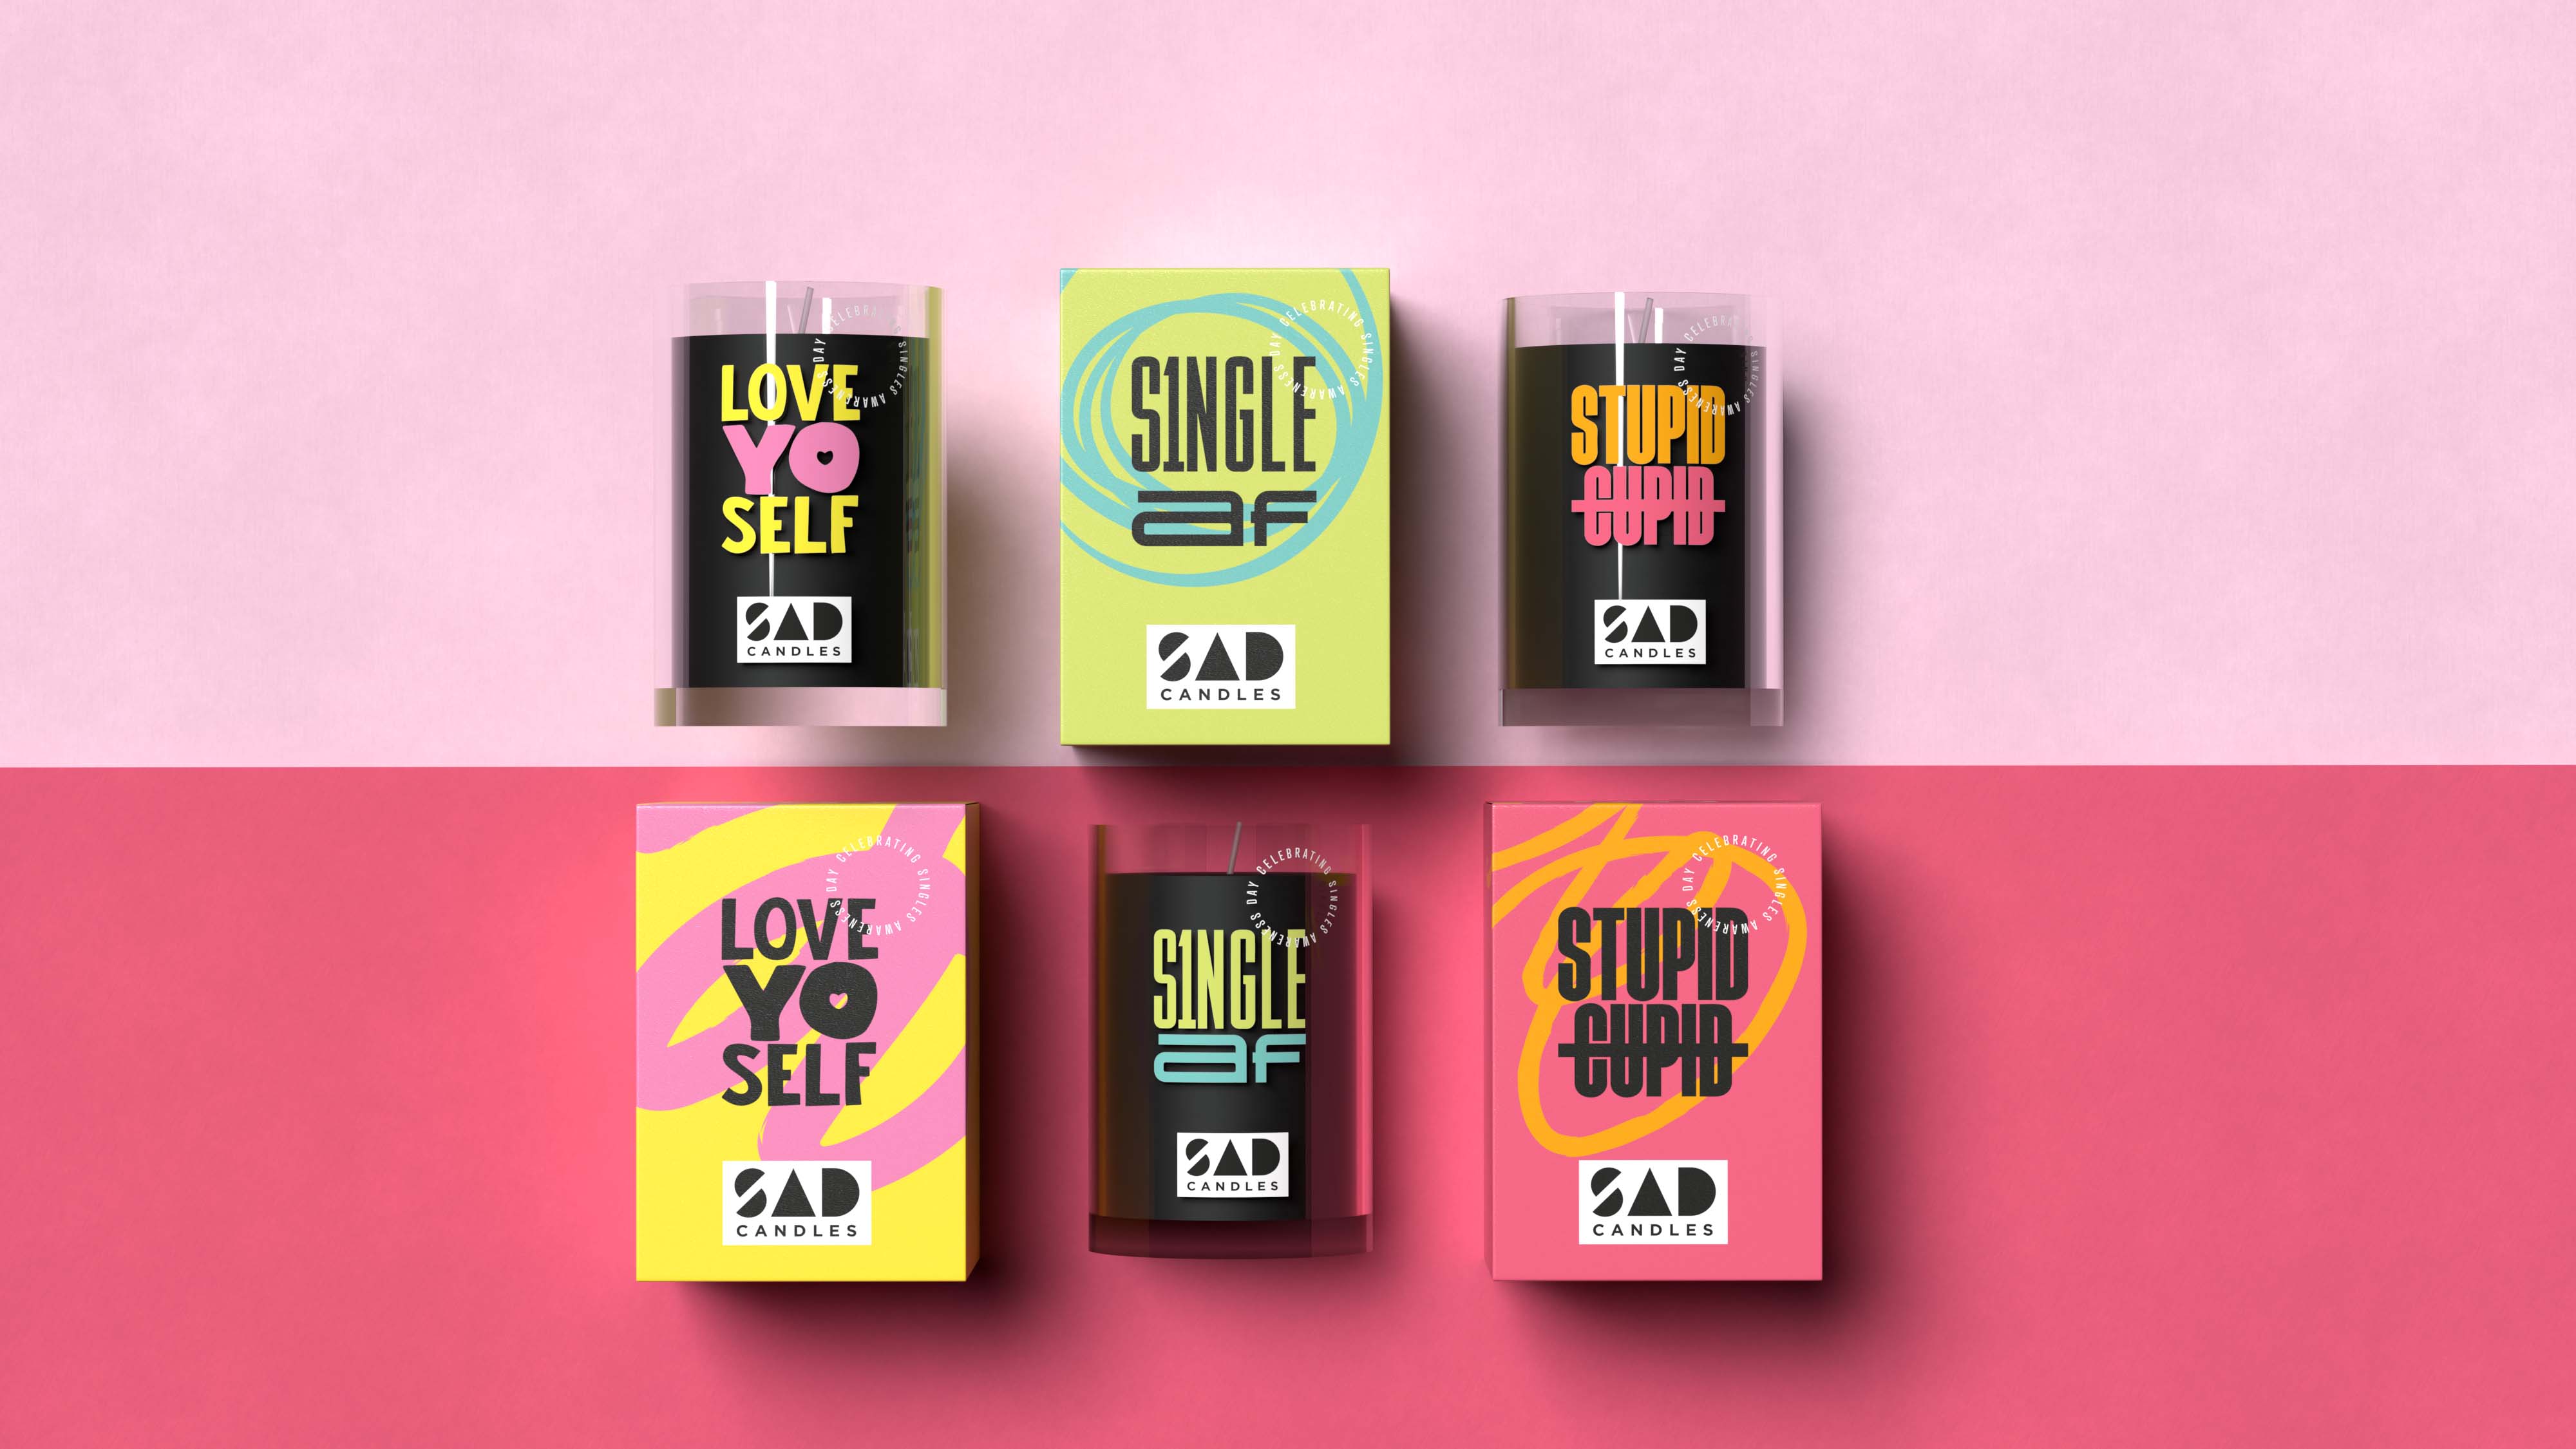 SAD Candles, a Range of Unique Scented Candles Designed by Hart & Jones